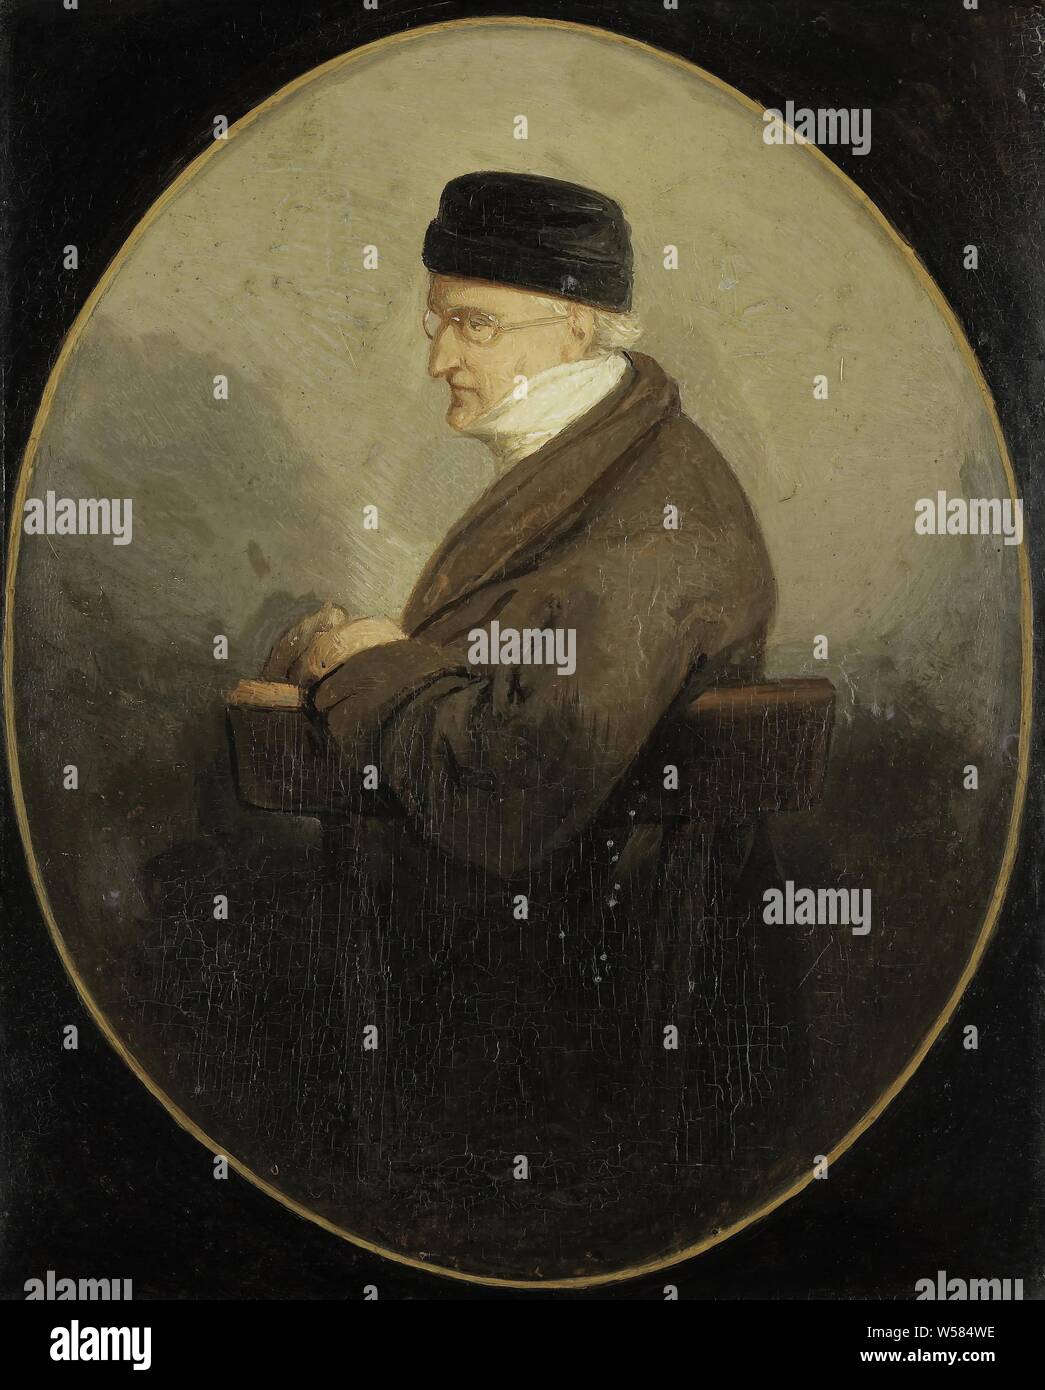 David Pierre Giottino Humbert the Superville (1770-1849), Painter and Writer, Portrait of David Pierre Giottino Humbert the Superville, painter and writer. Sitting in a chair, a black hat on the head., Jacobus Ludovicus Cornet, c. 1840 - c. 1849, panel, oil paint (paint), h 18.9 cm × w 16 cm d 4 cm Stock Photo